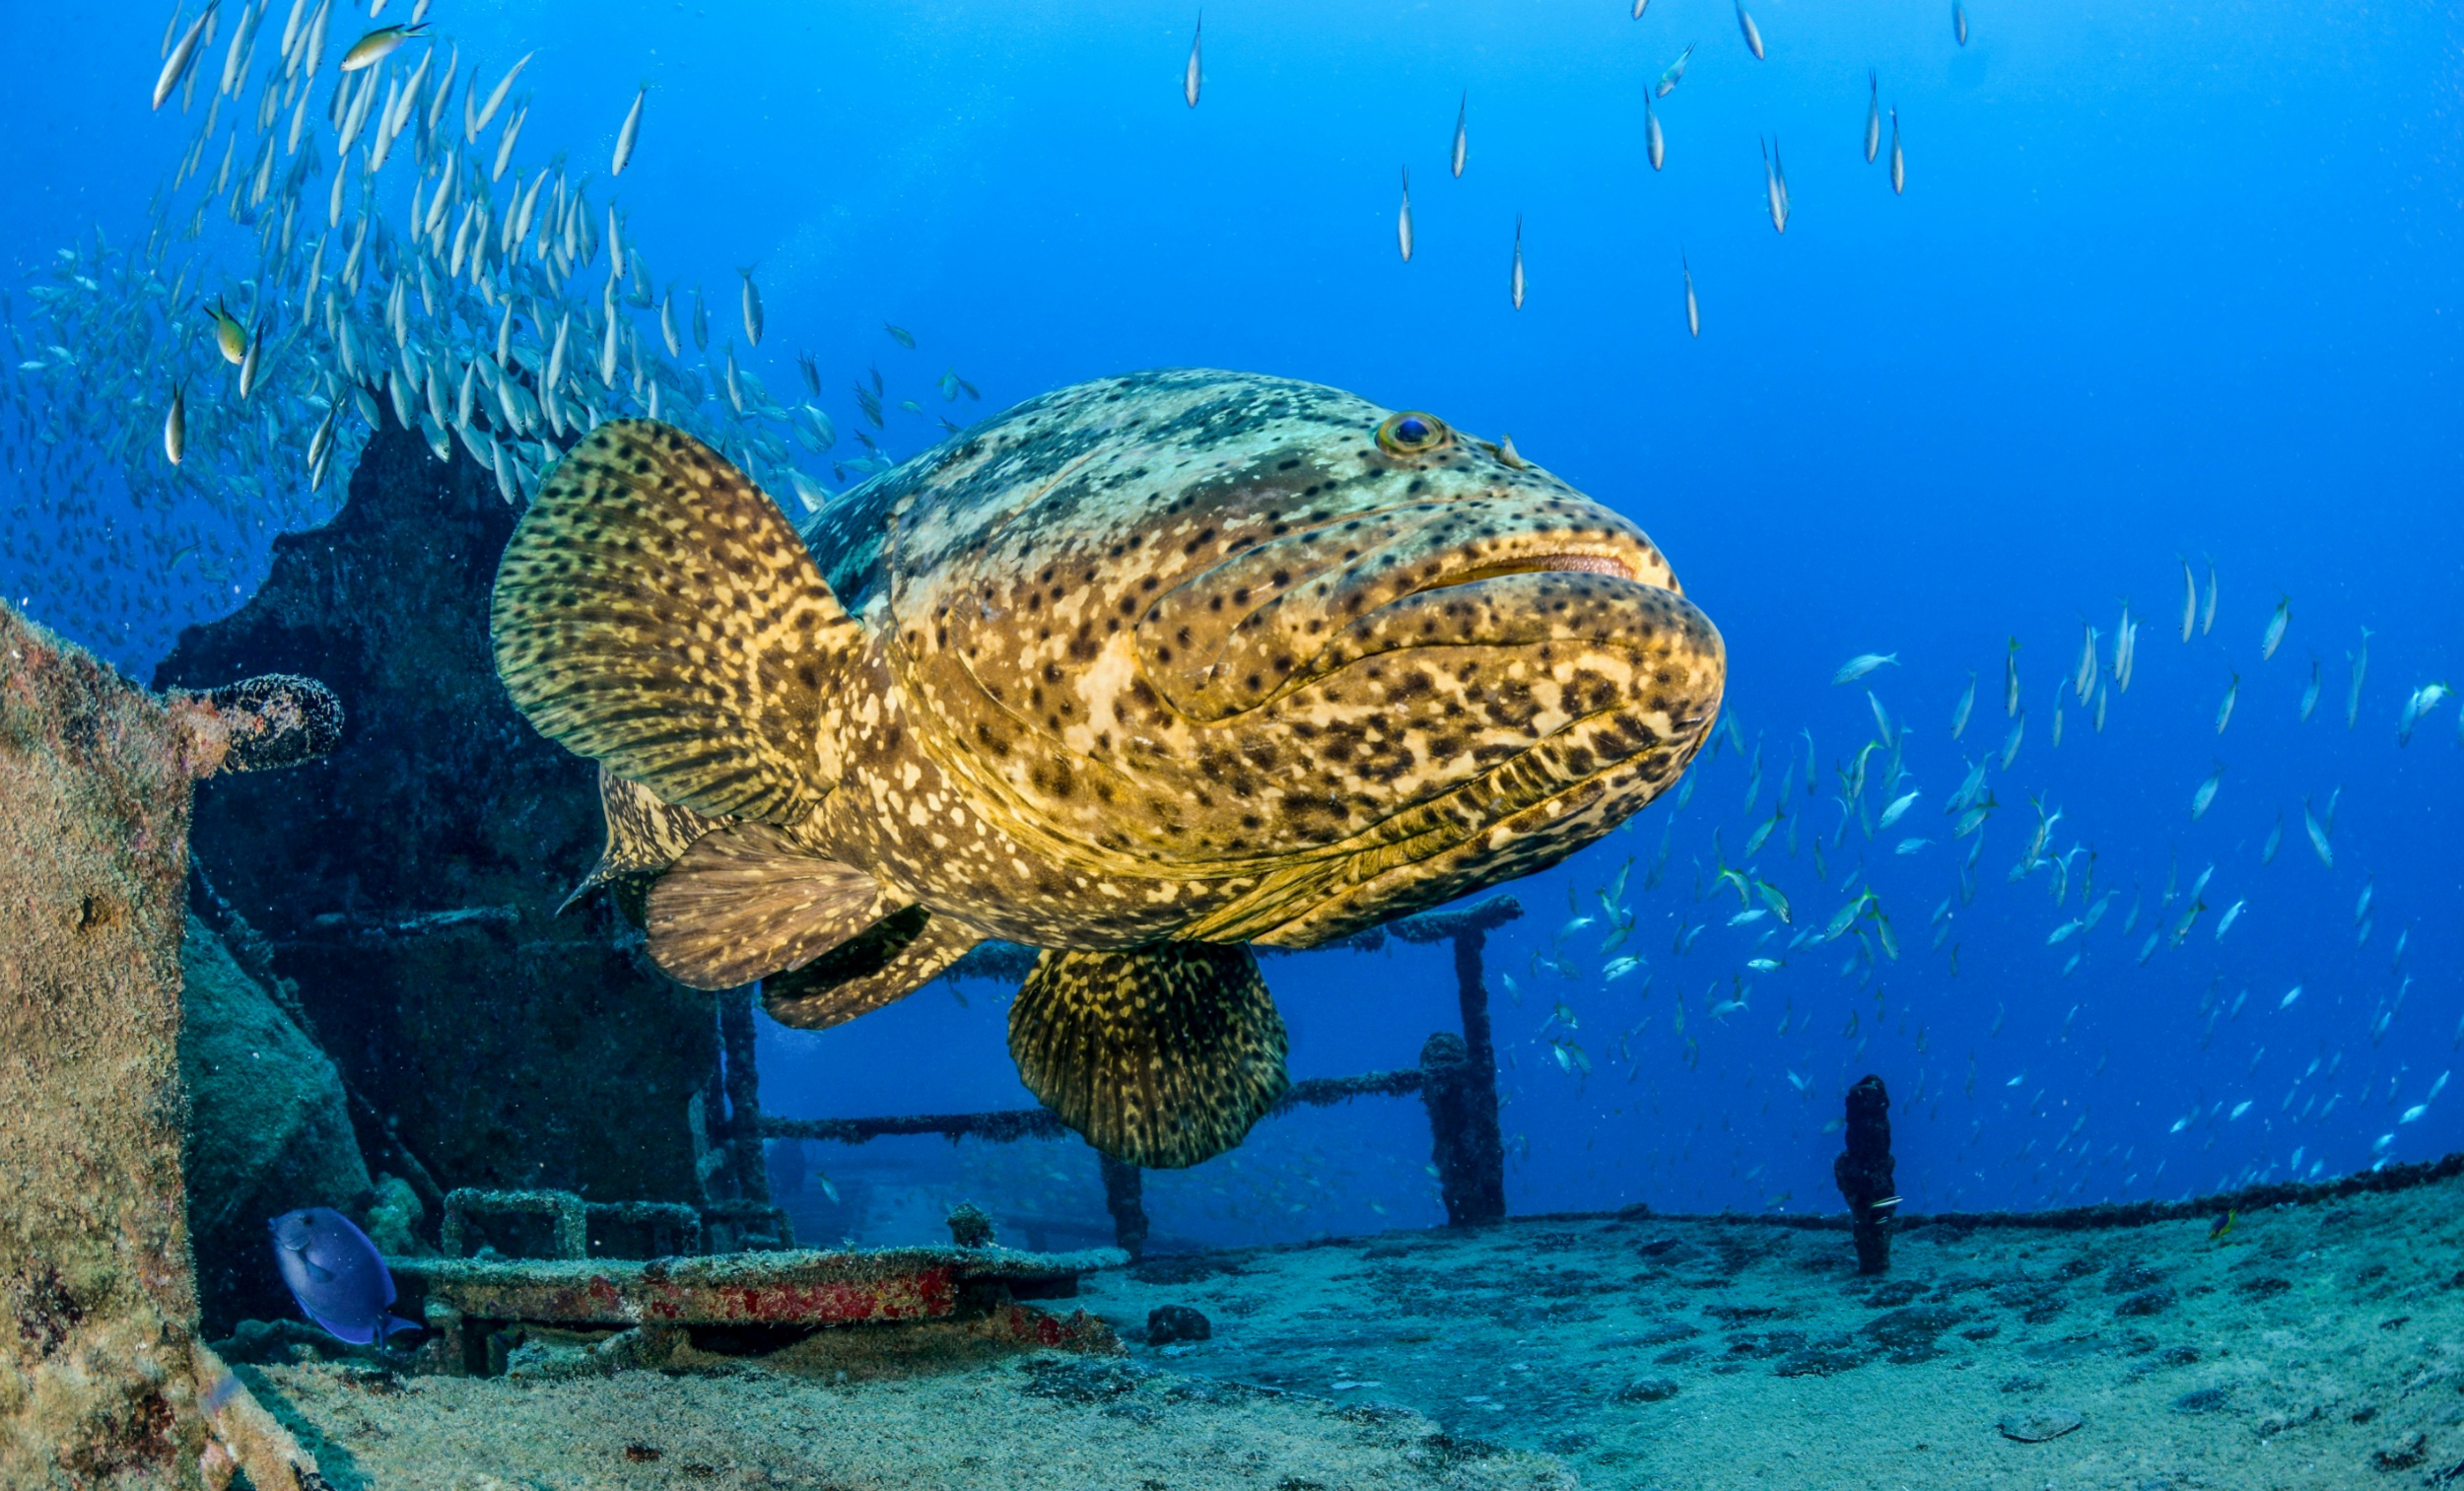 Goliath Grouper at the Spiegel Grove wreck